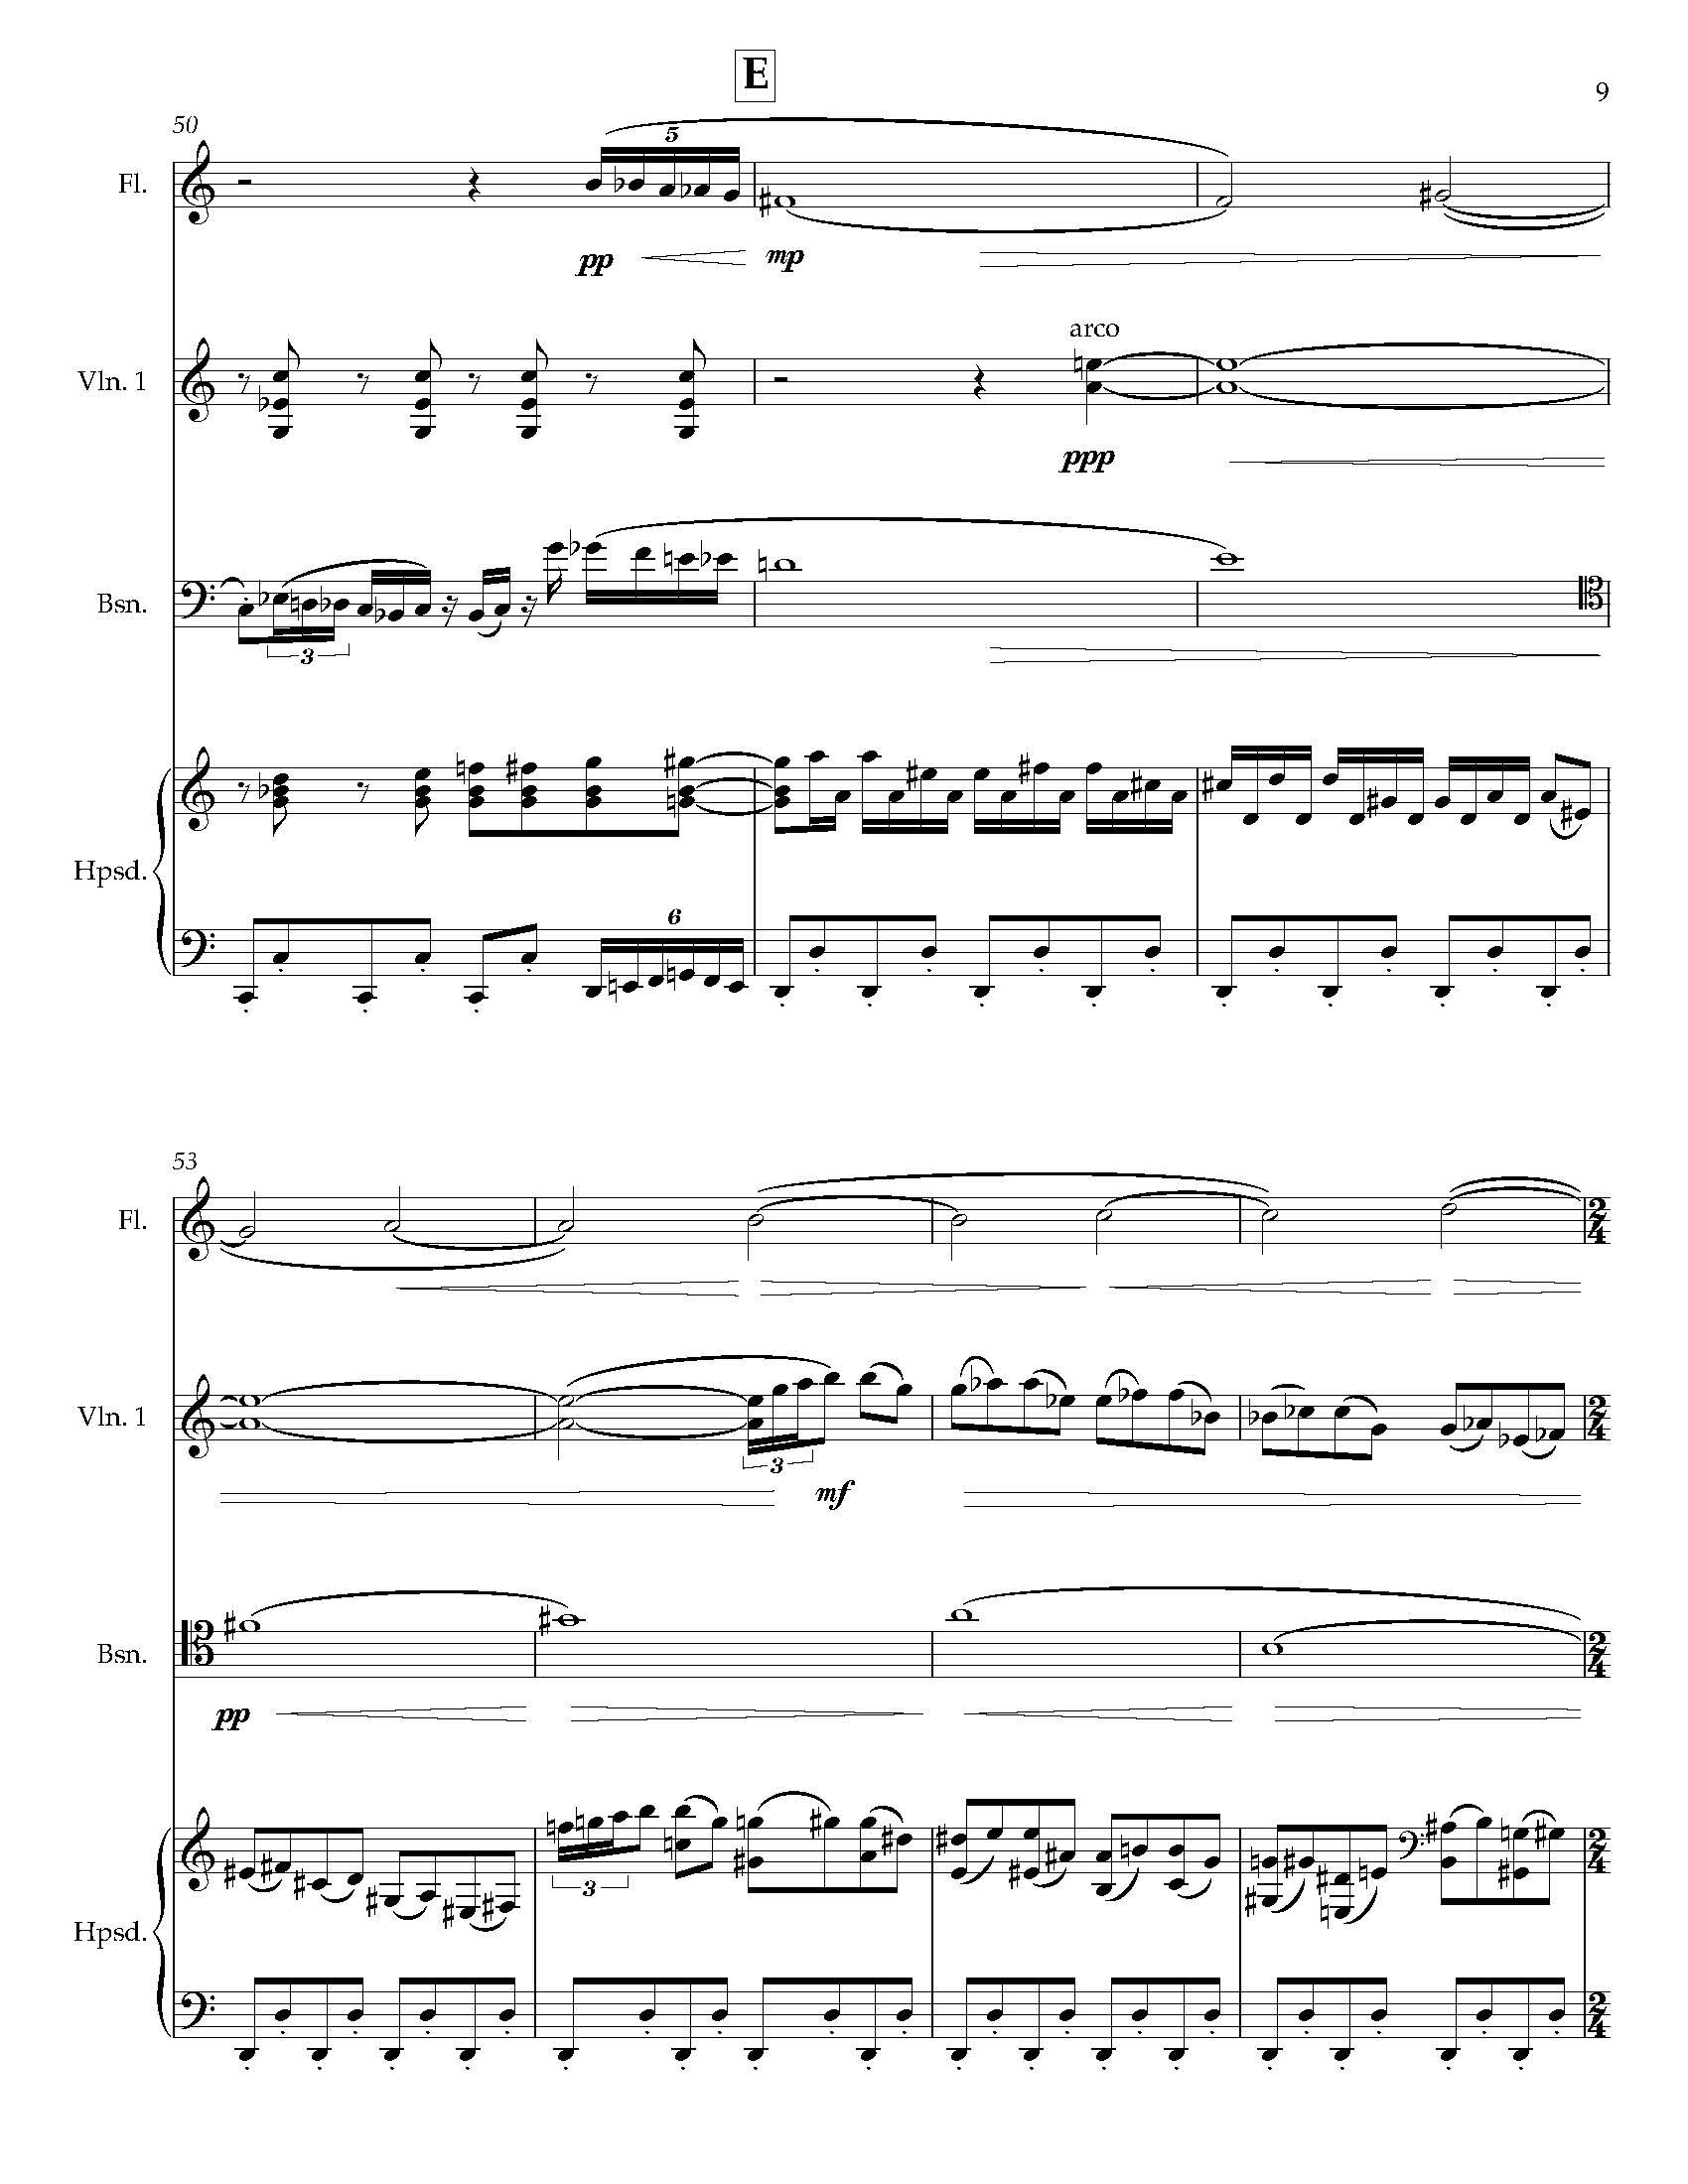 The Hourglass Equation - Complete Score_Page_15.jpg